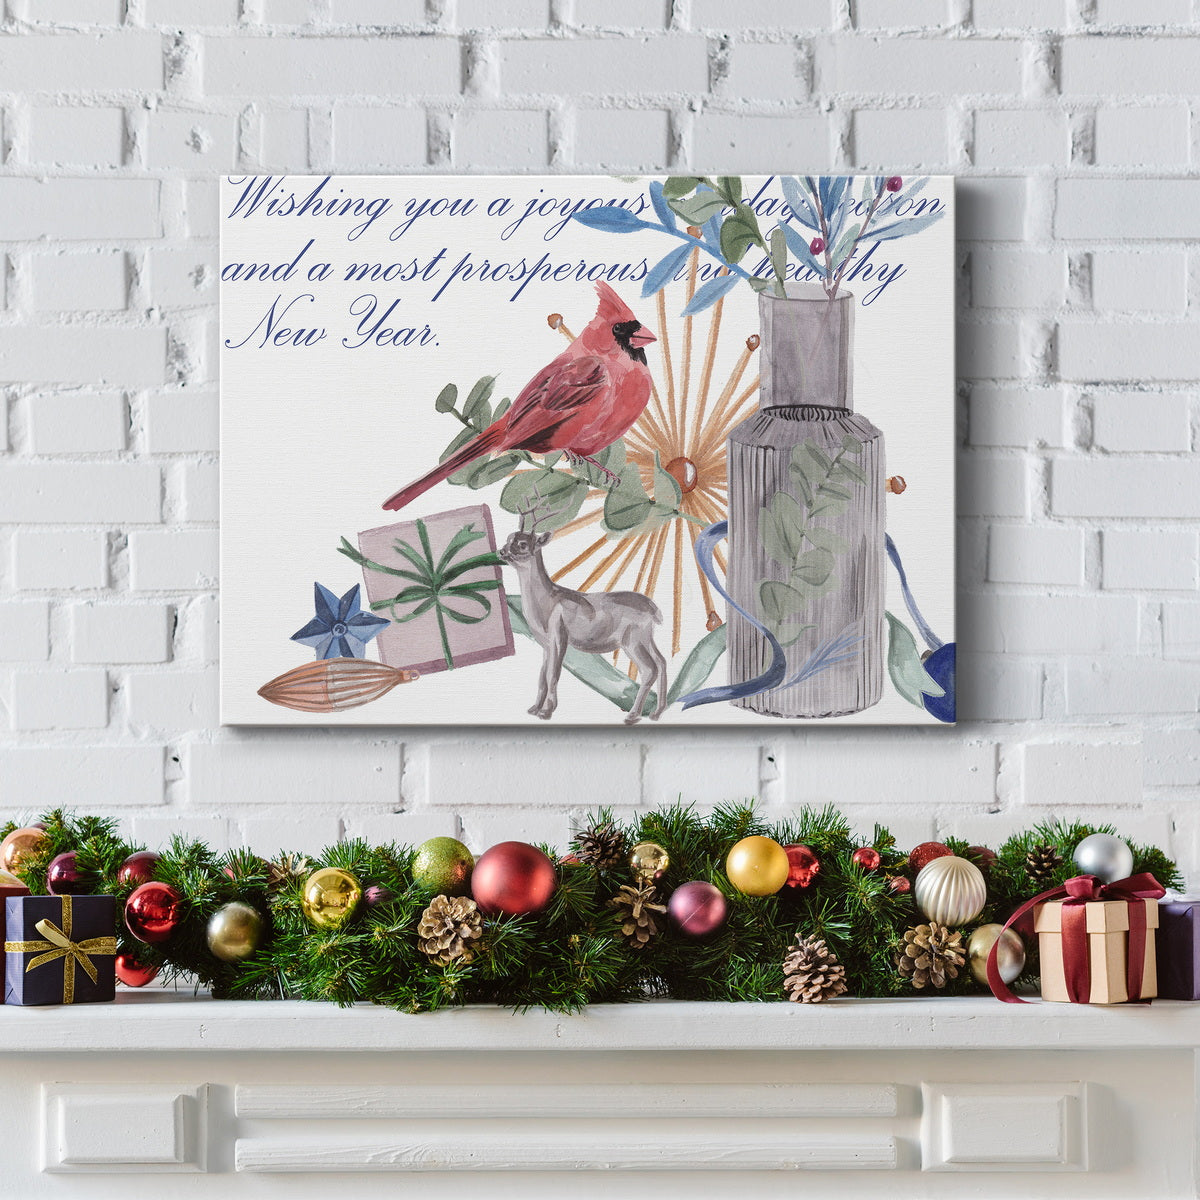 Warm Wishes - Premium Gallery Wrapped Canvas  - Ready to Hang